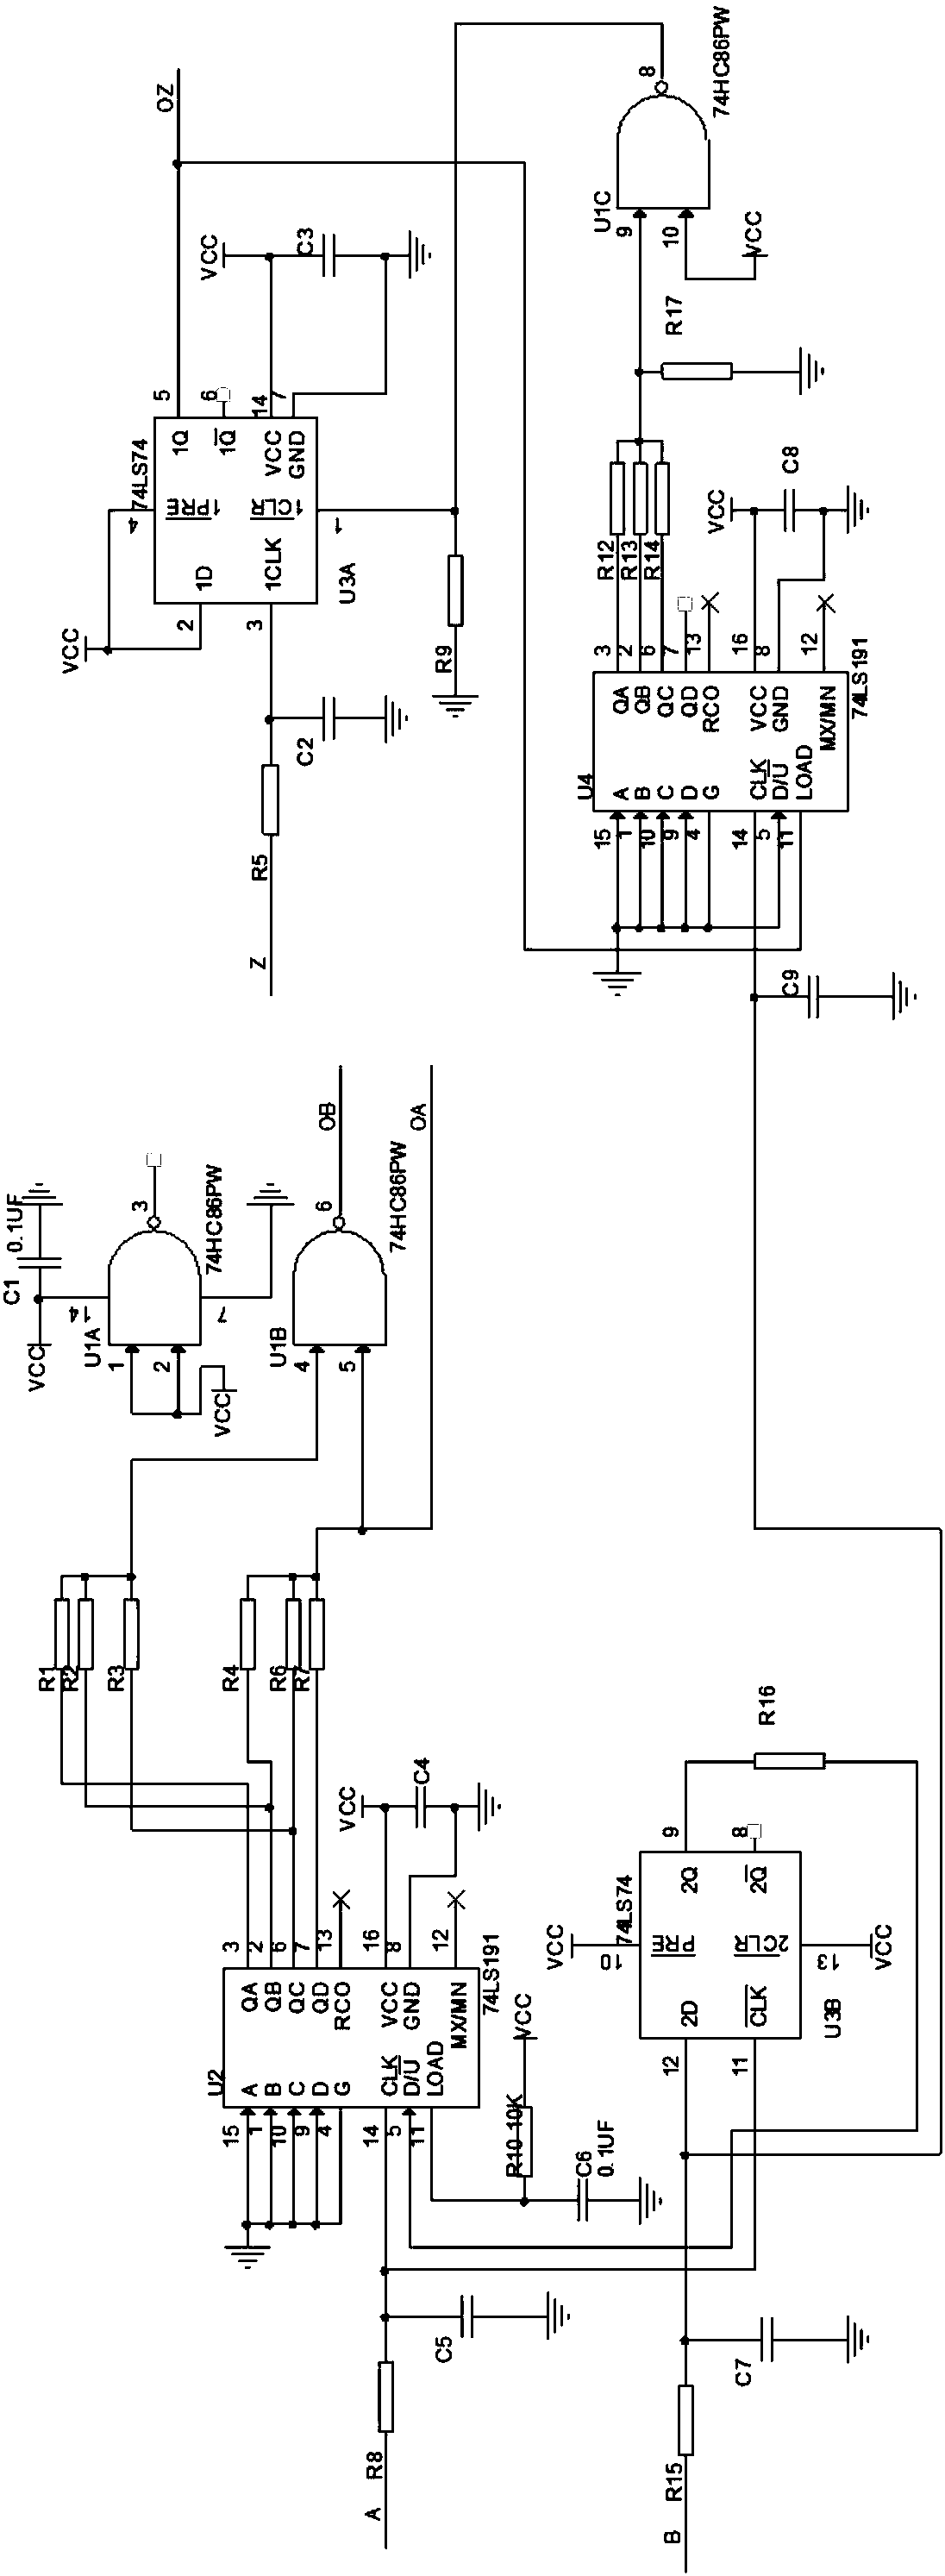 Encoder frequency dividing circuit